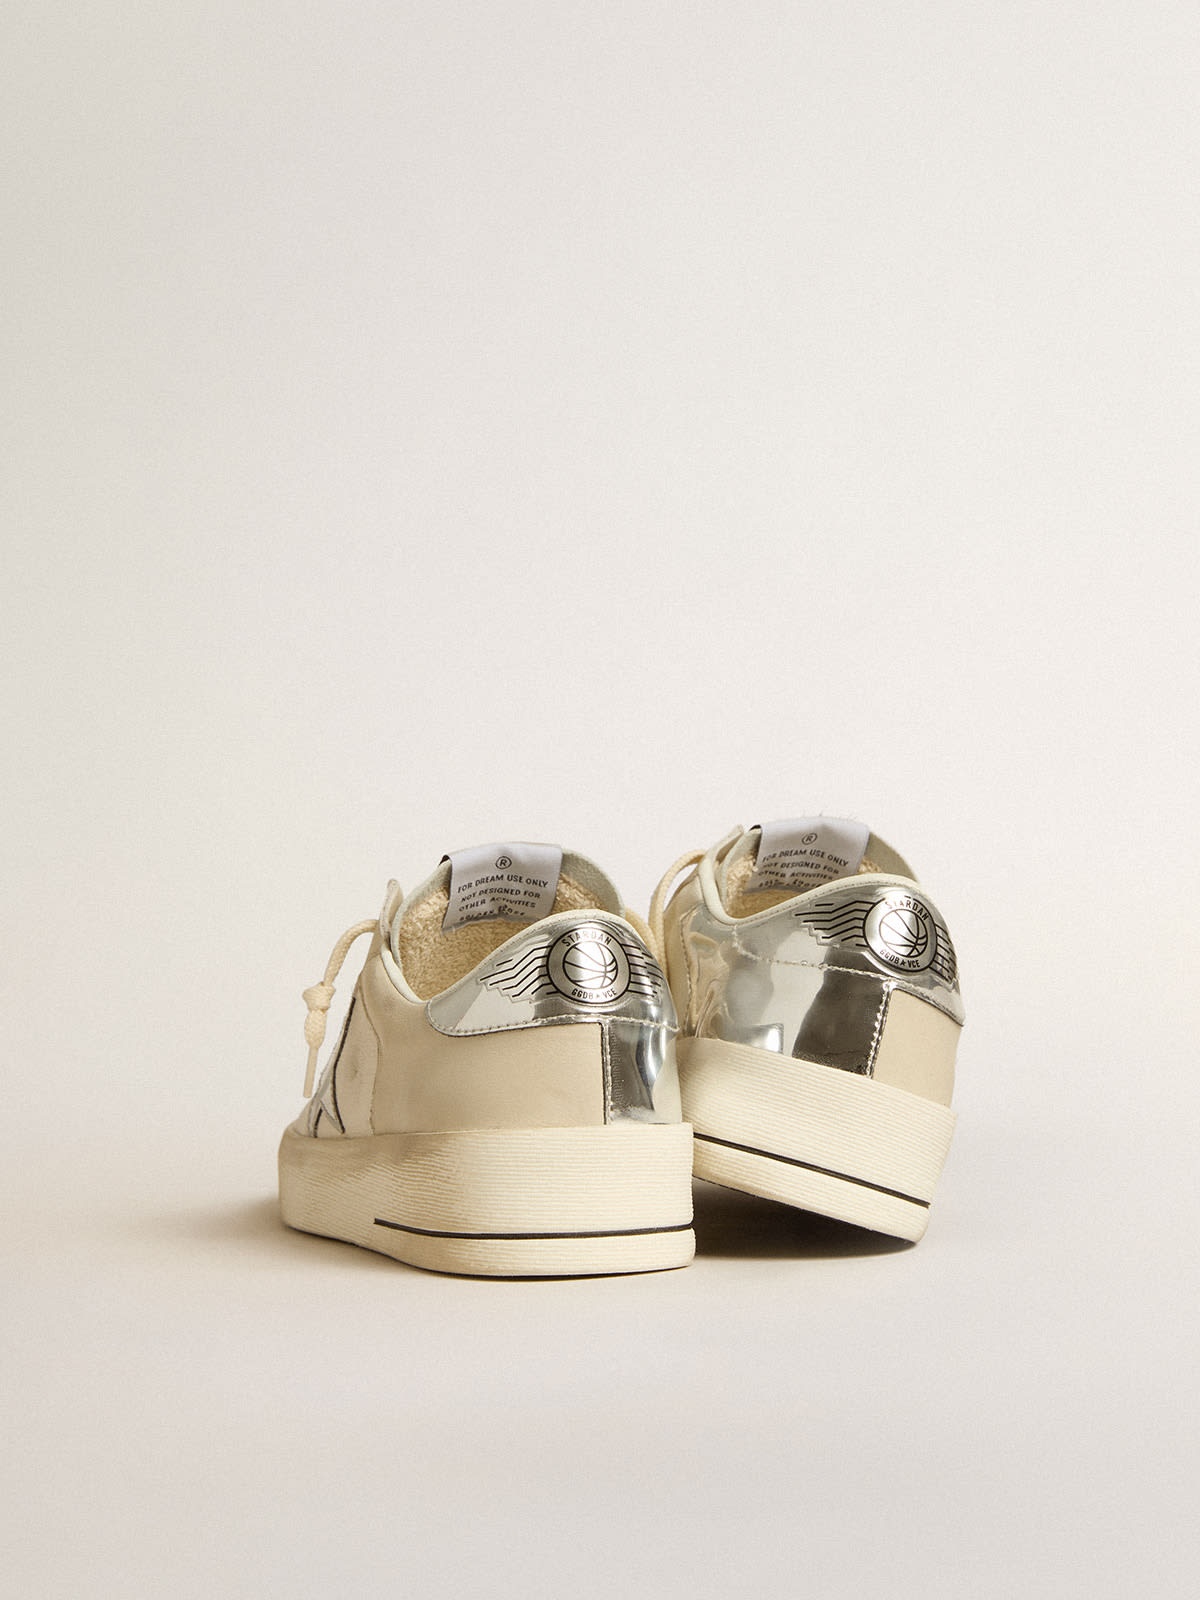 Stardan in nappa with silver mirror-effect star and heel tab - 4